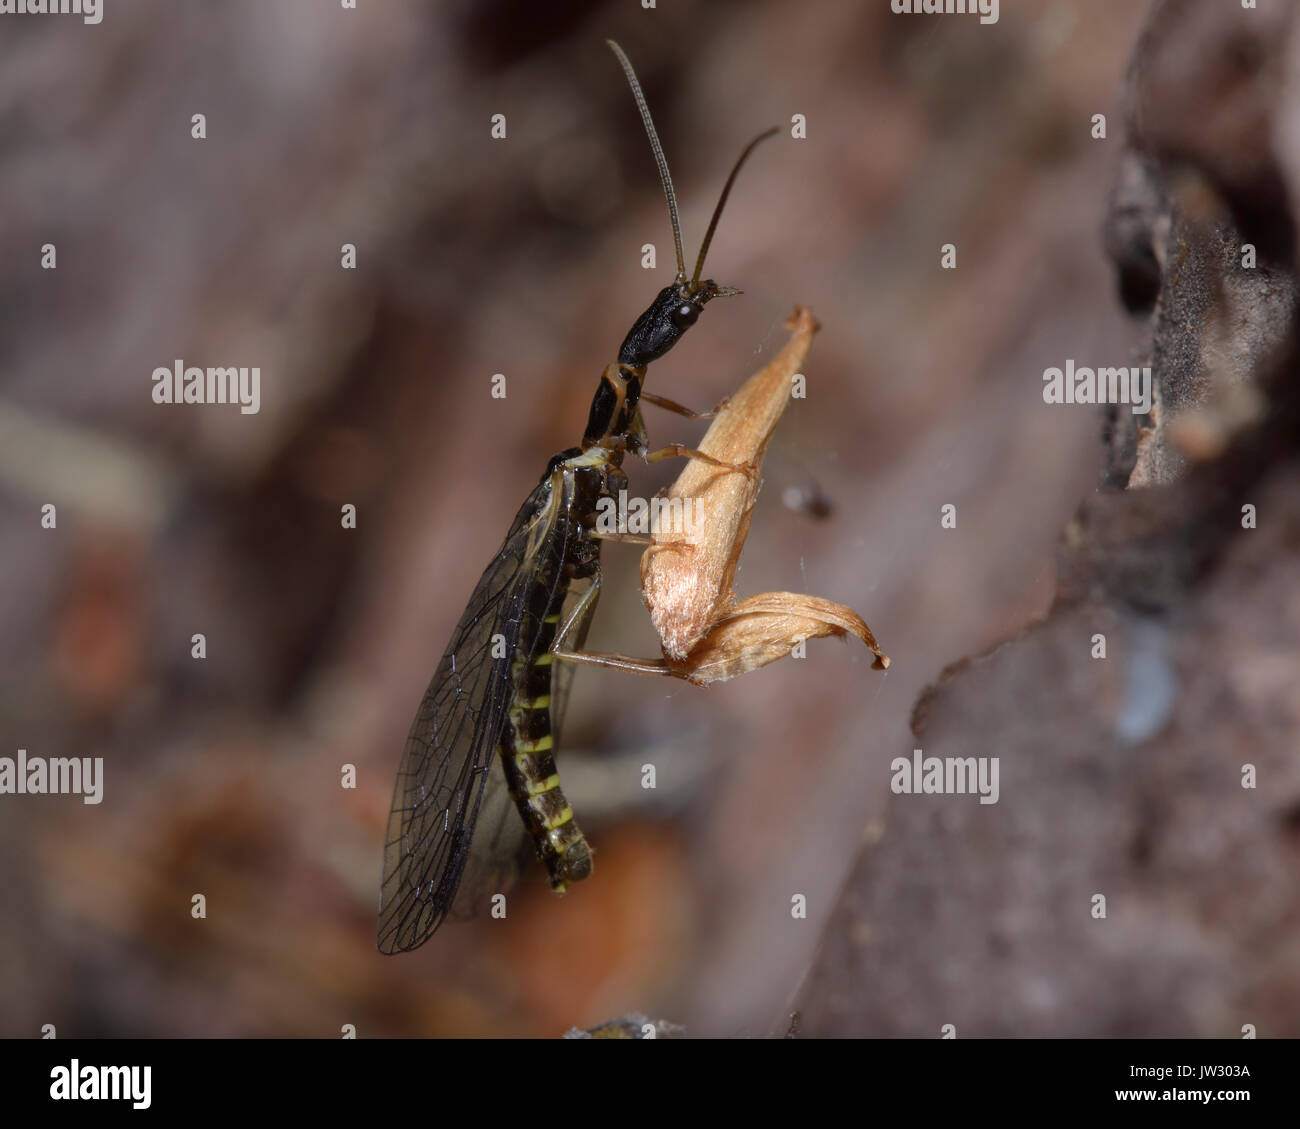 A snakefly, Raphidioptera, sitting on a piece of yellow leaf in front of brown blurred background. Stock Photo